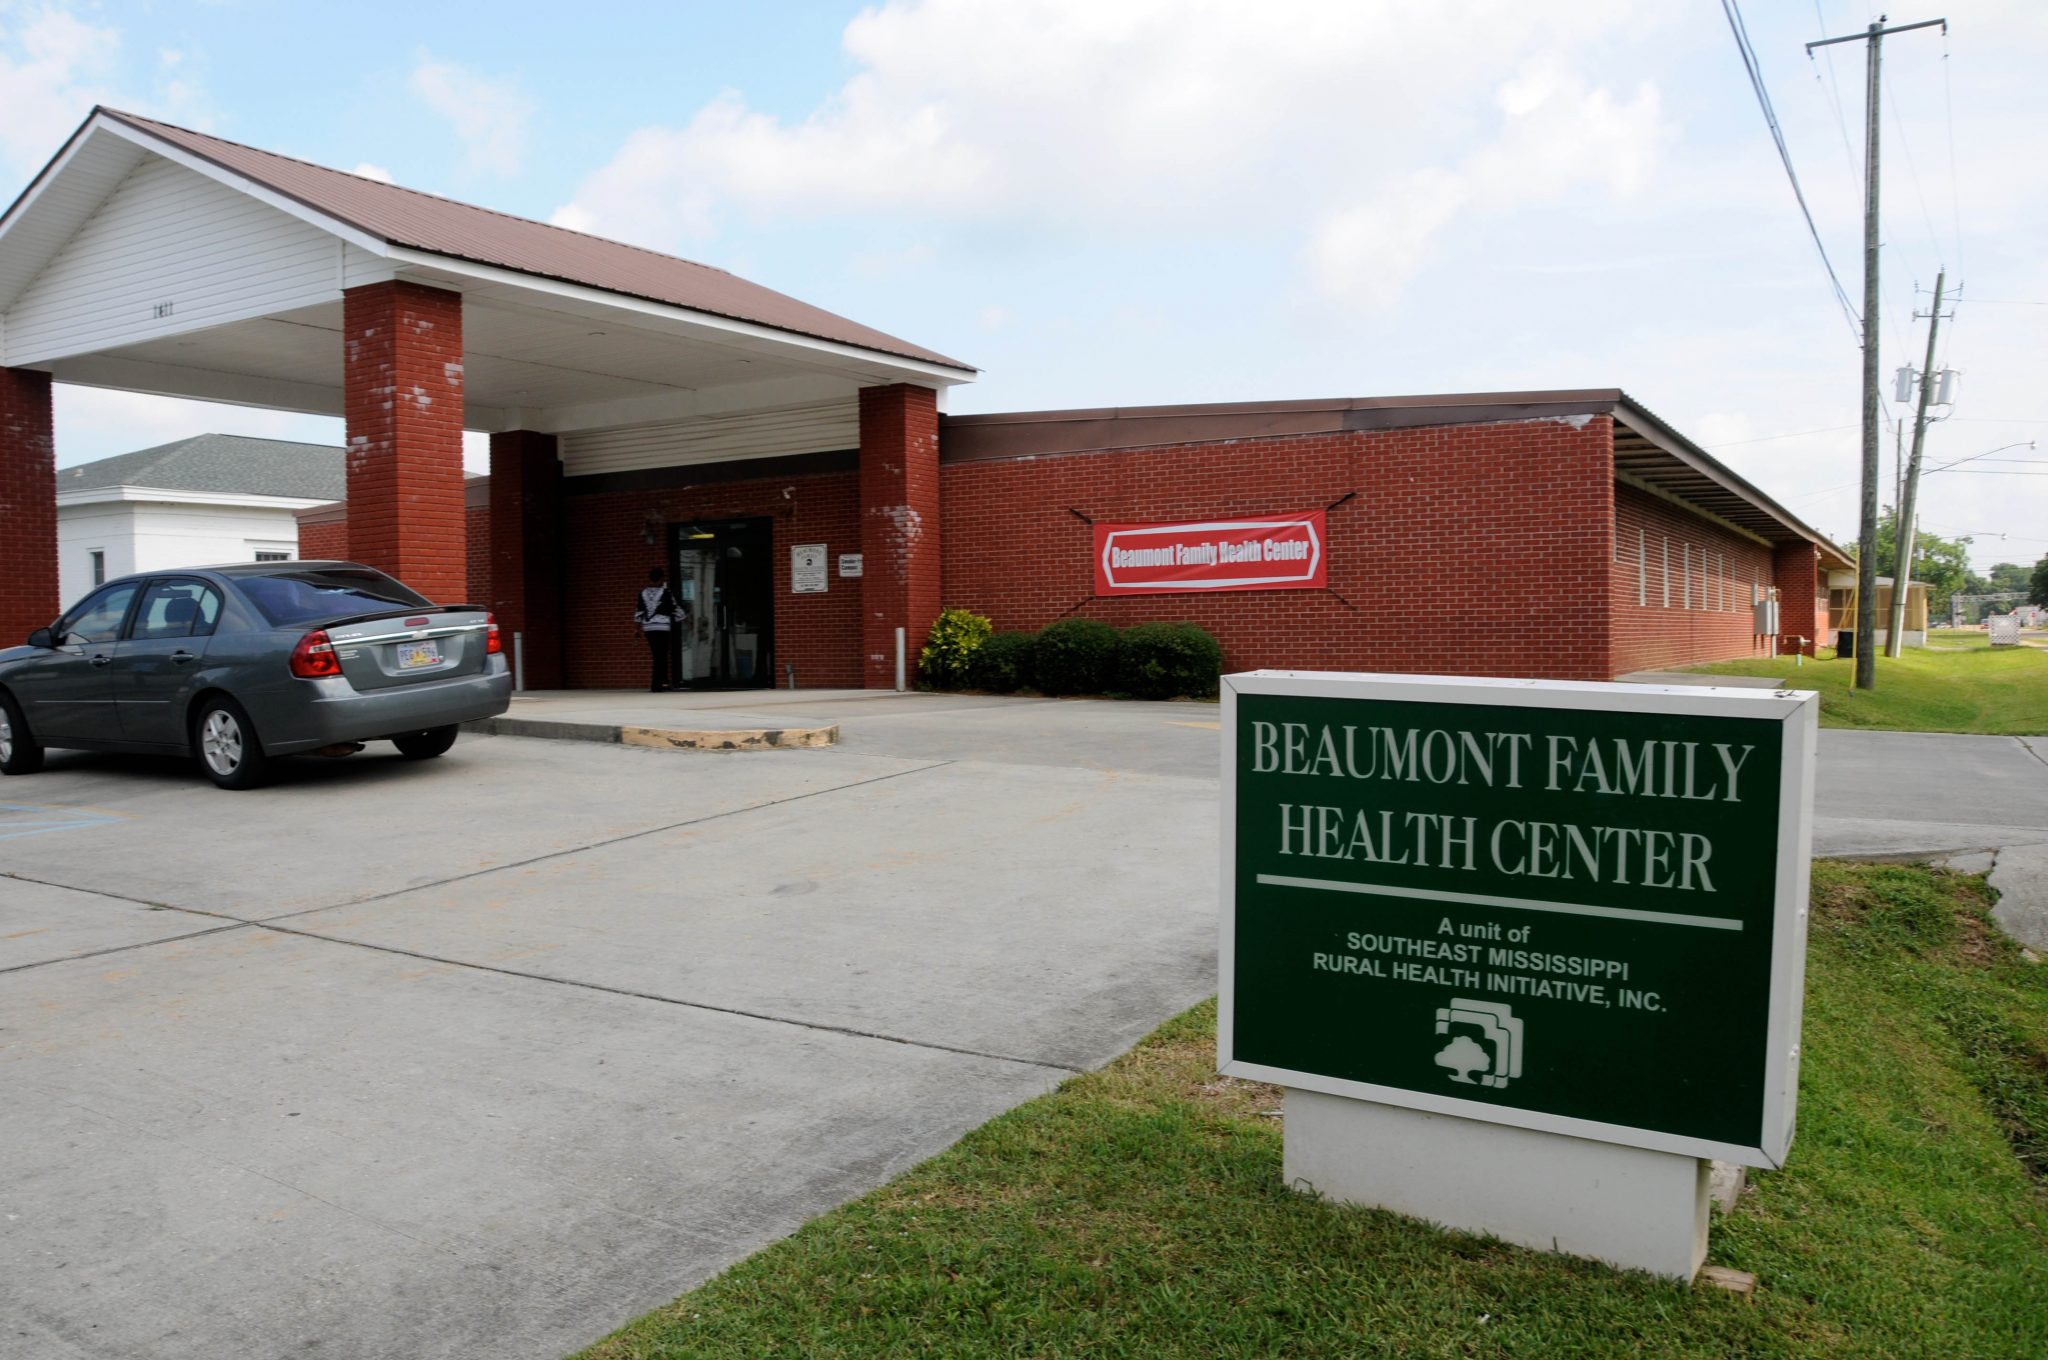 Beaumont Family Health Center